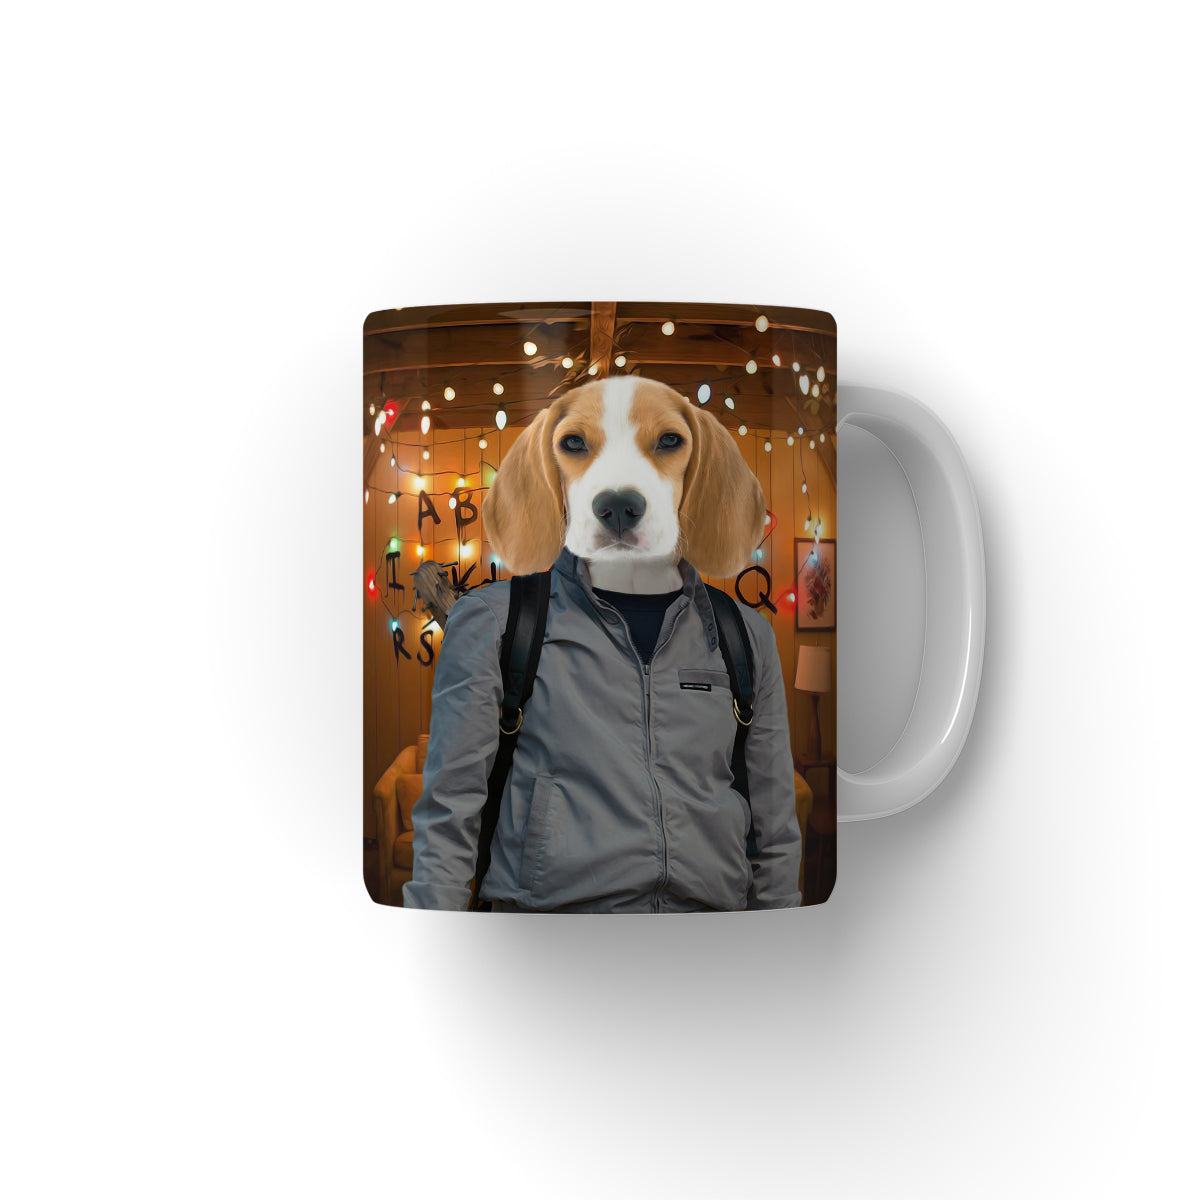 paw and glory, pawandglory, dog and cat paintings, portrait of pet from photo, print of your dog, paw prints gifts, puppy mug, dog and cat mug